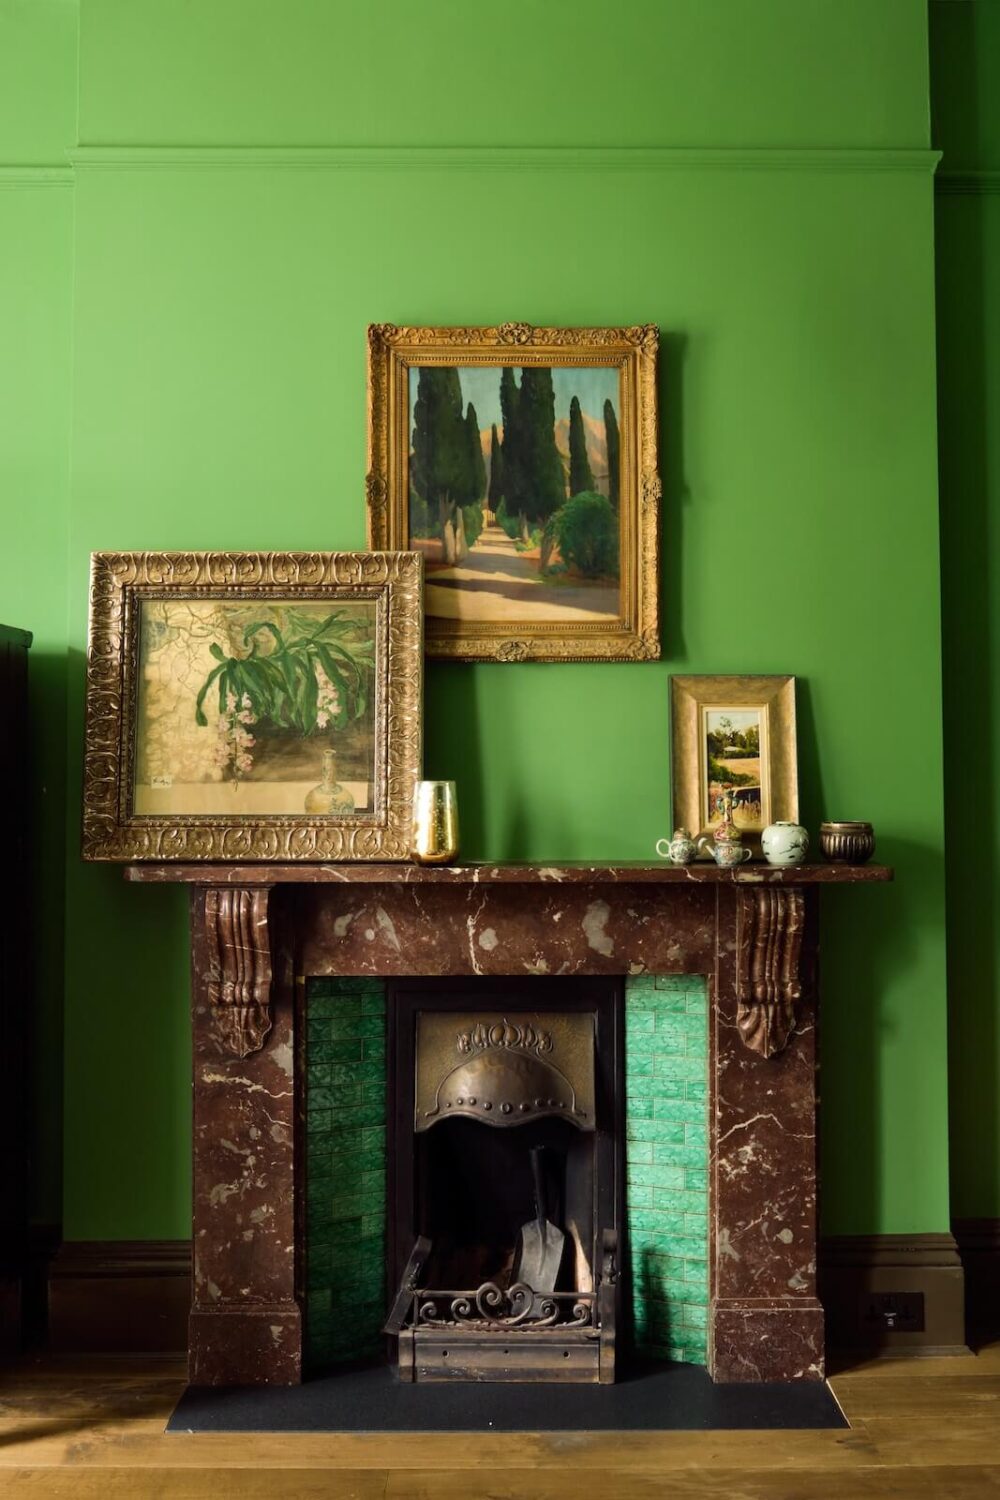 violet-marble-firpelace-green-walls-antique-art-nordroom